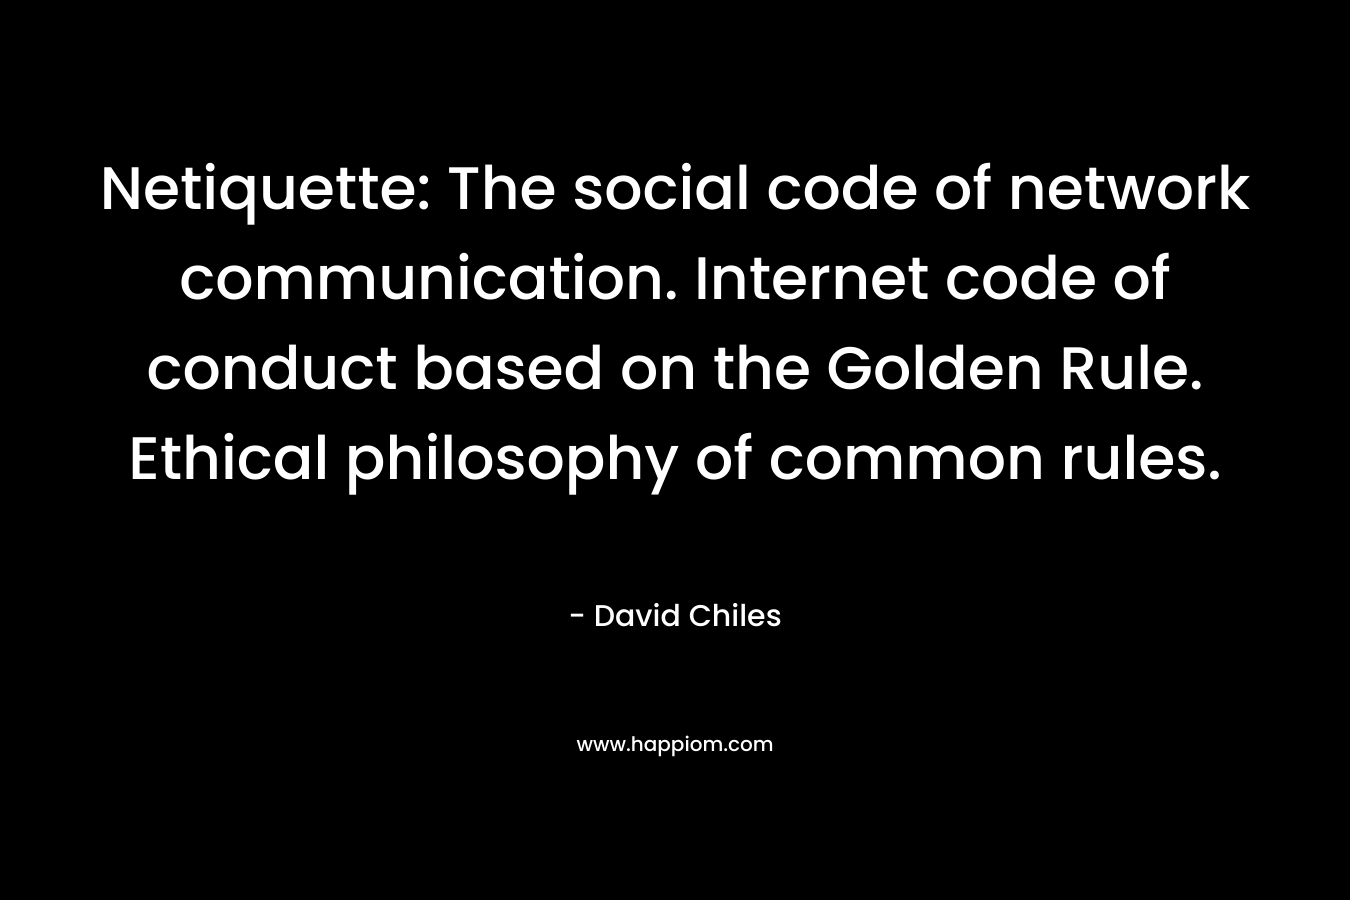 Netiquette: The social code of network communication. Internet code of conduct based on the Golden Rule. Ethical philosophy of common rules. – David Chiles